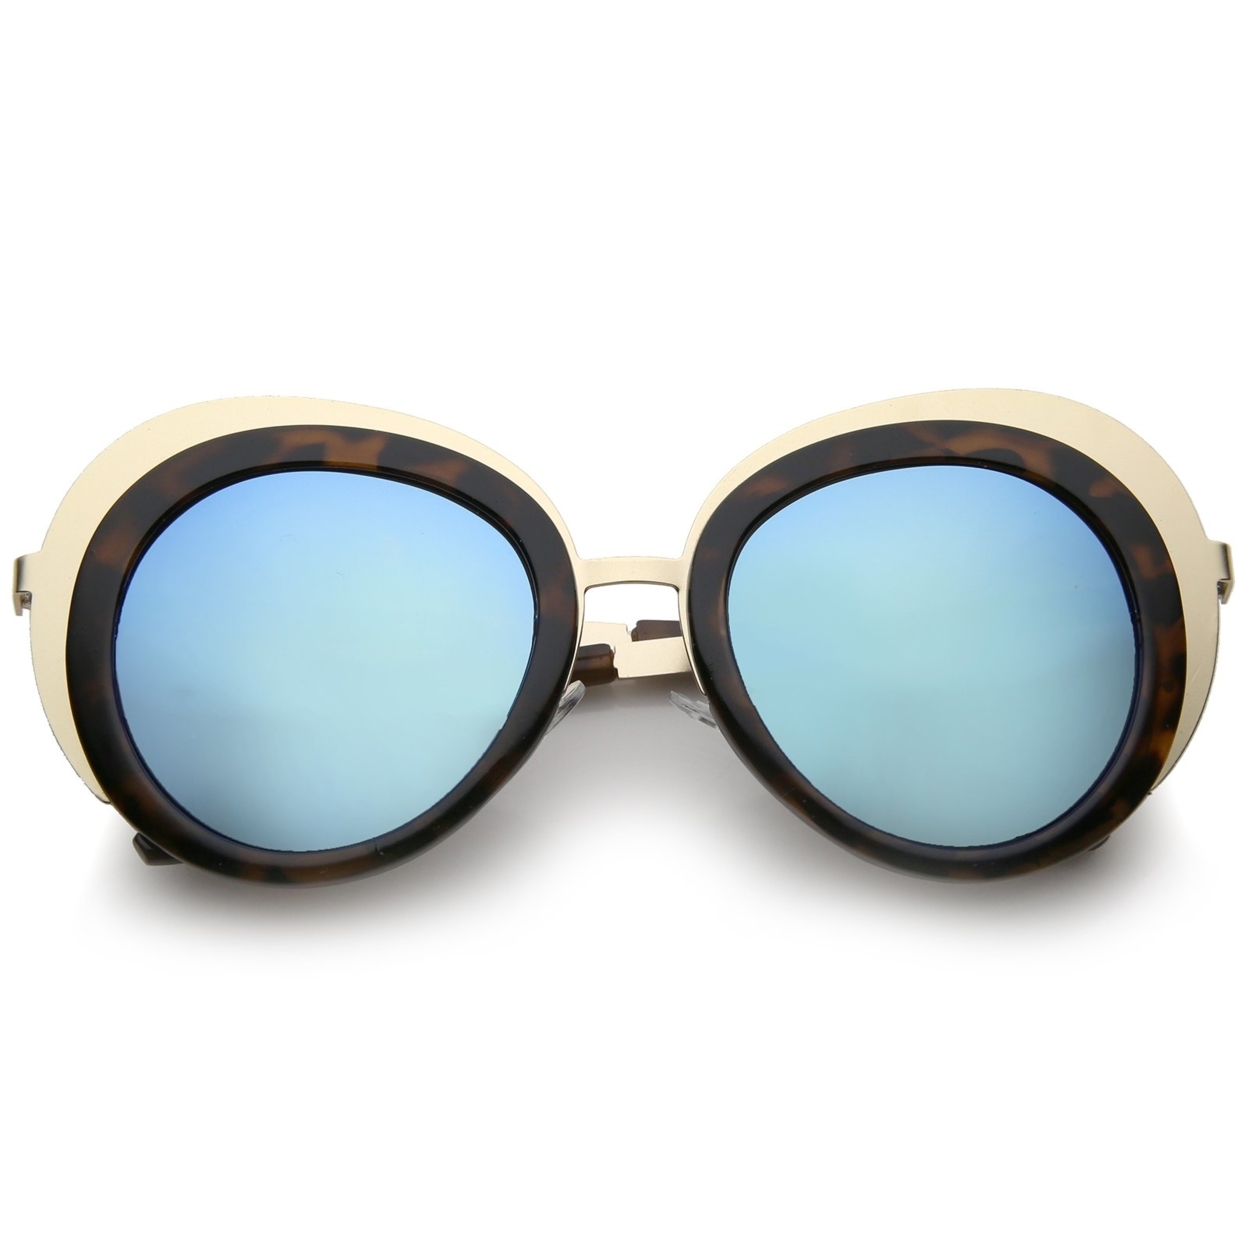 Women's Two-Tone Metal Backing Colored Mirror Lens Round Sunglasses 50mm - Gold-Black / Green-Blue Mirror